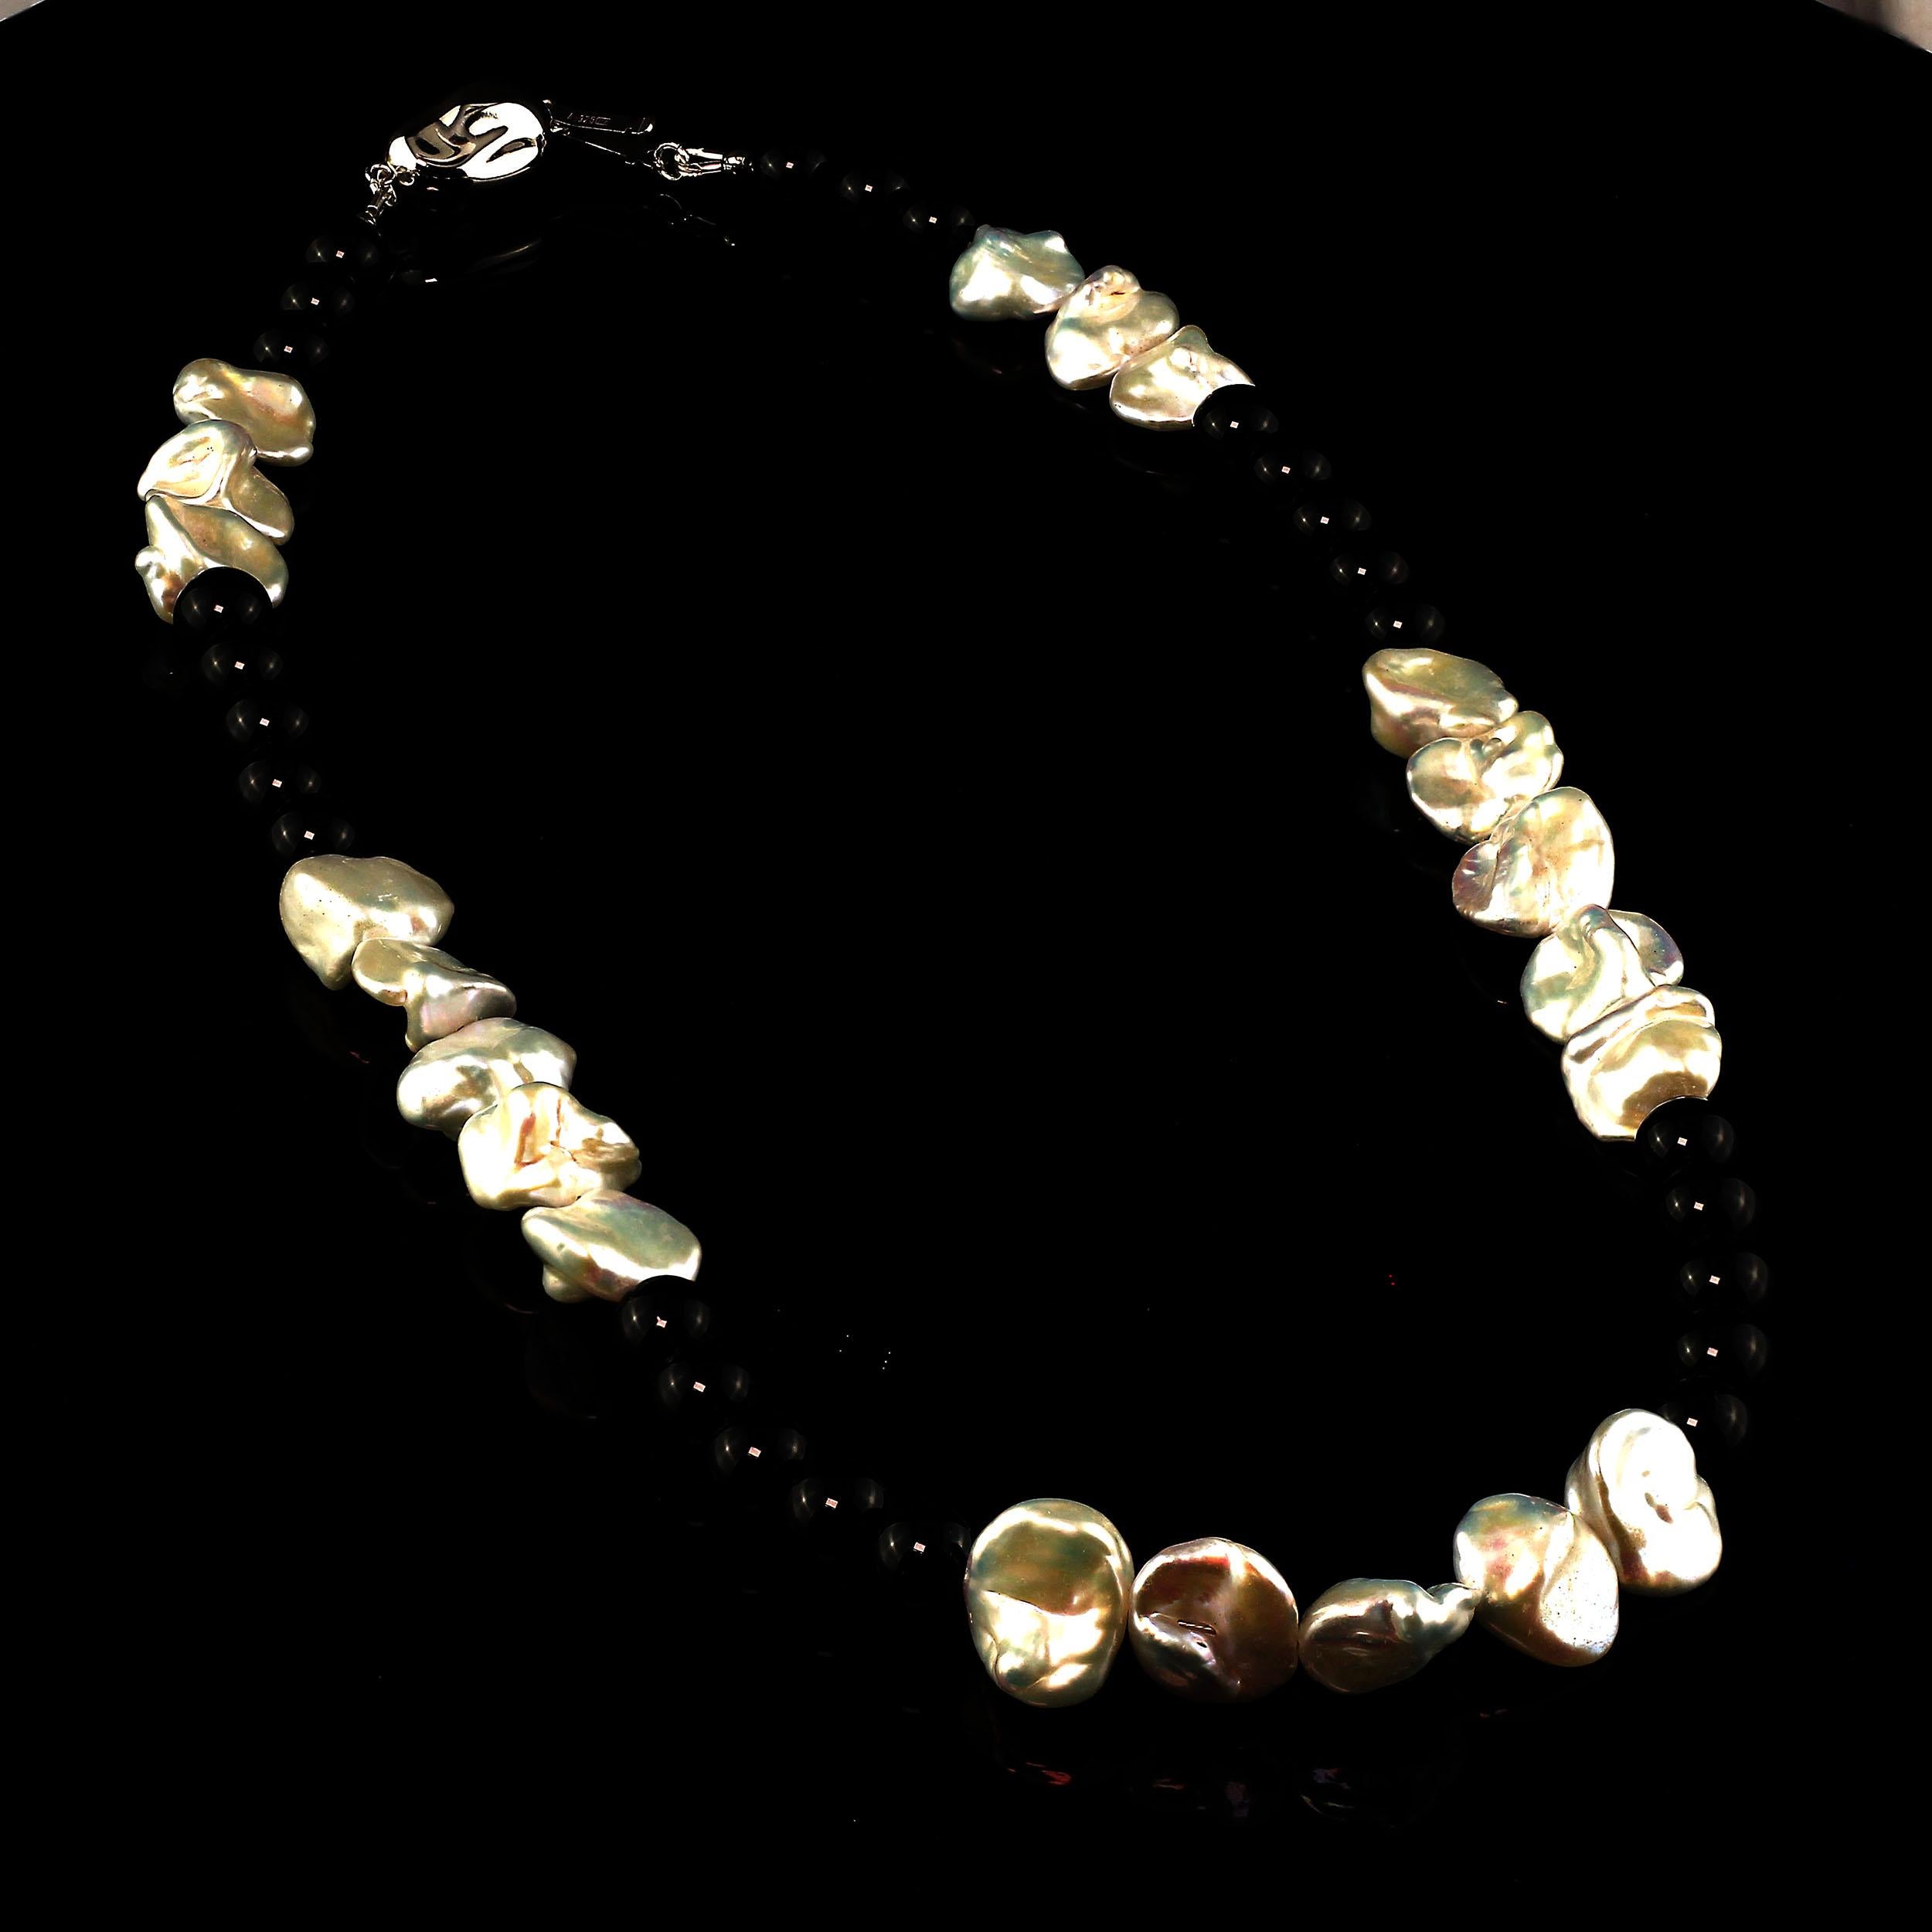 Gemjunky, unique black and white necklace.  This gorgeous necklace is a combination luscious, iridescent keshi Pearls (up to 13 MM) and smooth 8 MM Black Onyx.  The elegant style of this necklace will carry it from morning through the day and on